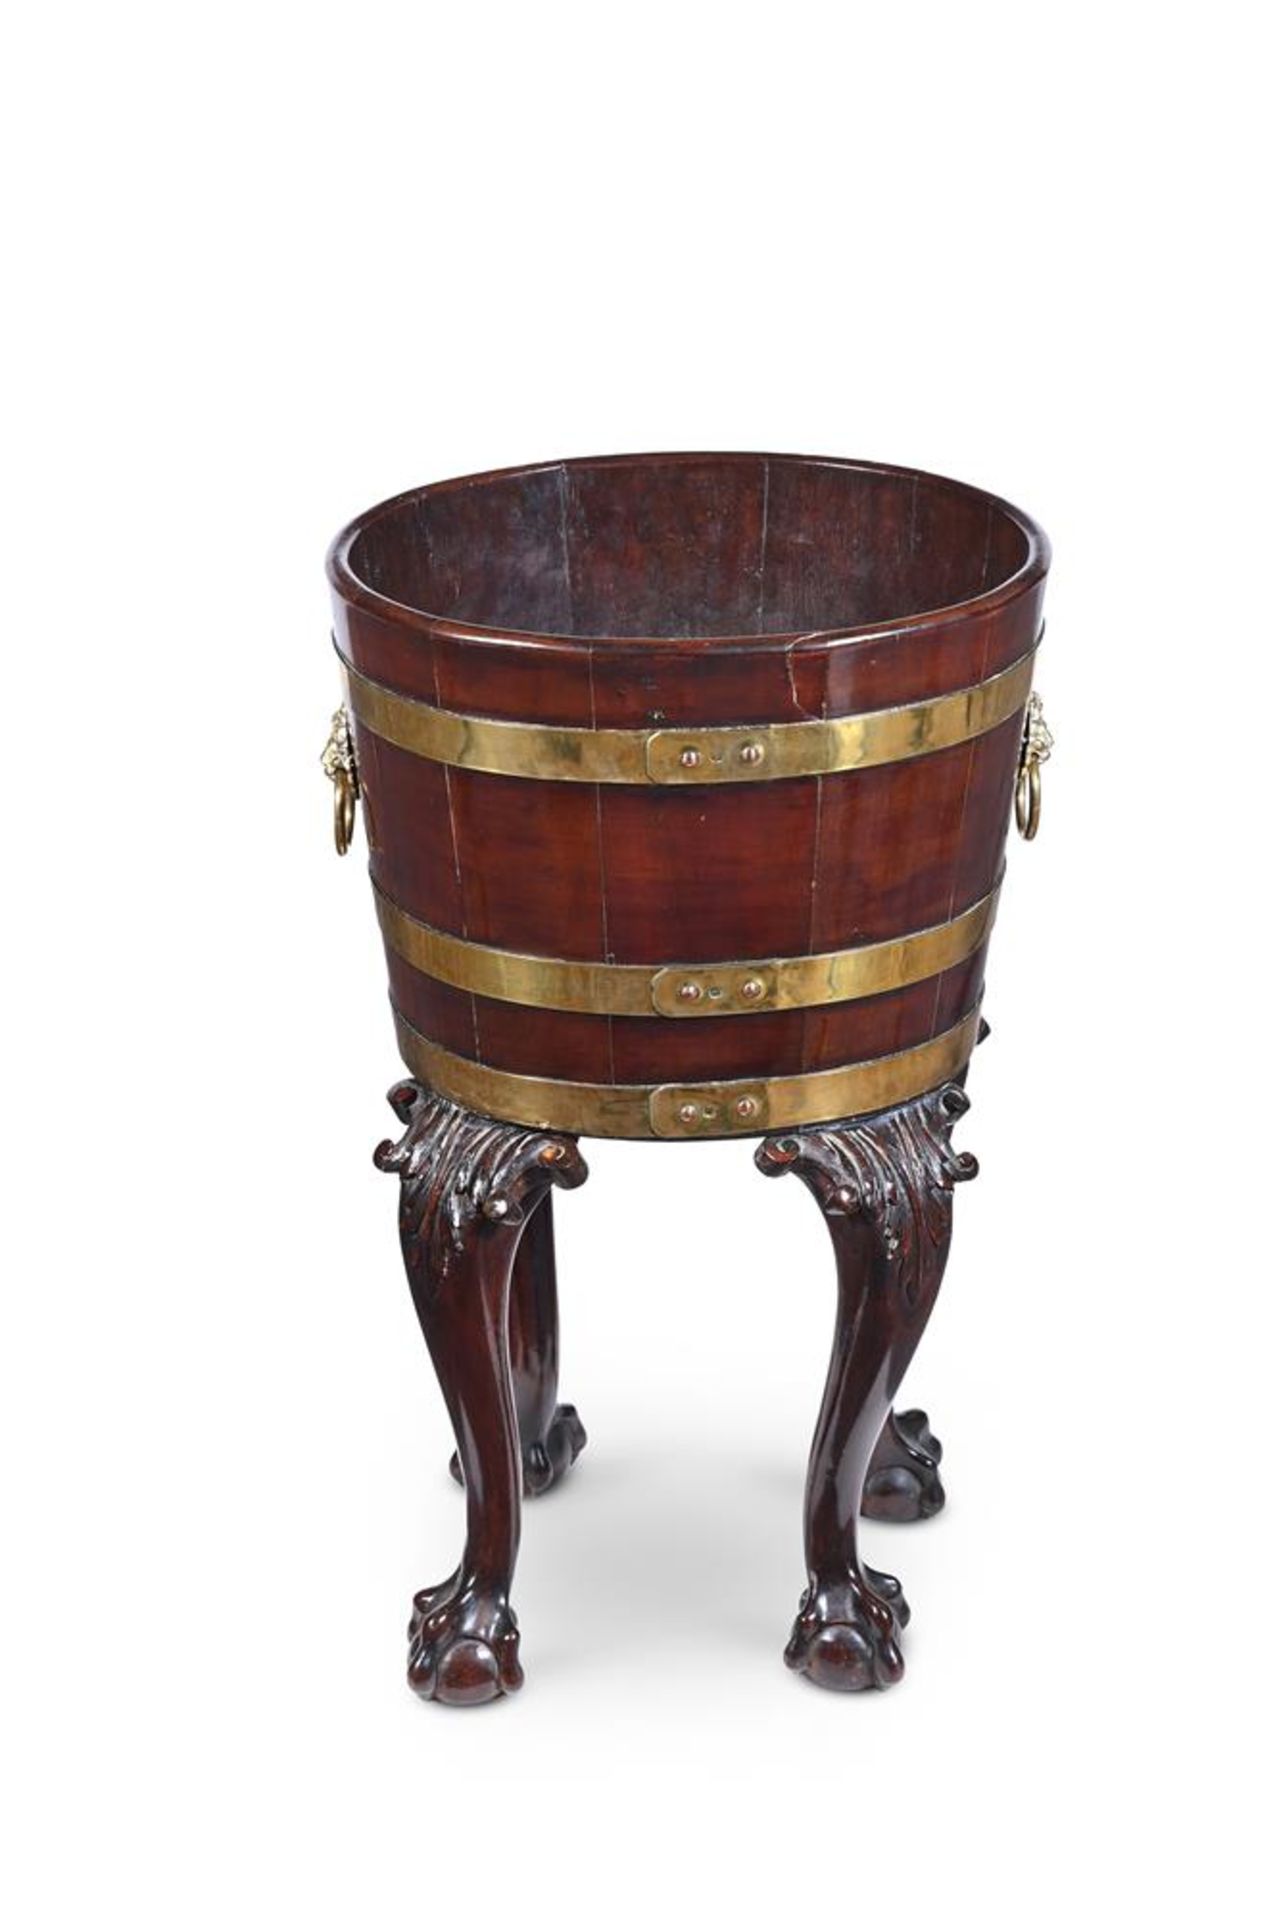 AN UNUSUAL GEORGE II MAHOGANY AND BRASS BOUND WINE COOLER, MID 18TH CENTURY AND LATER - Image 2 of 2